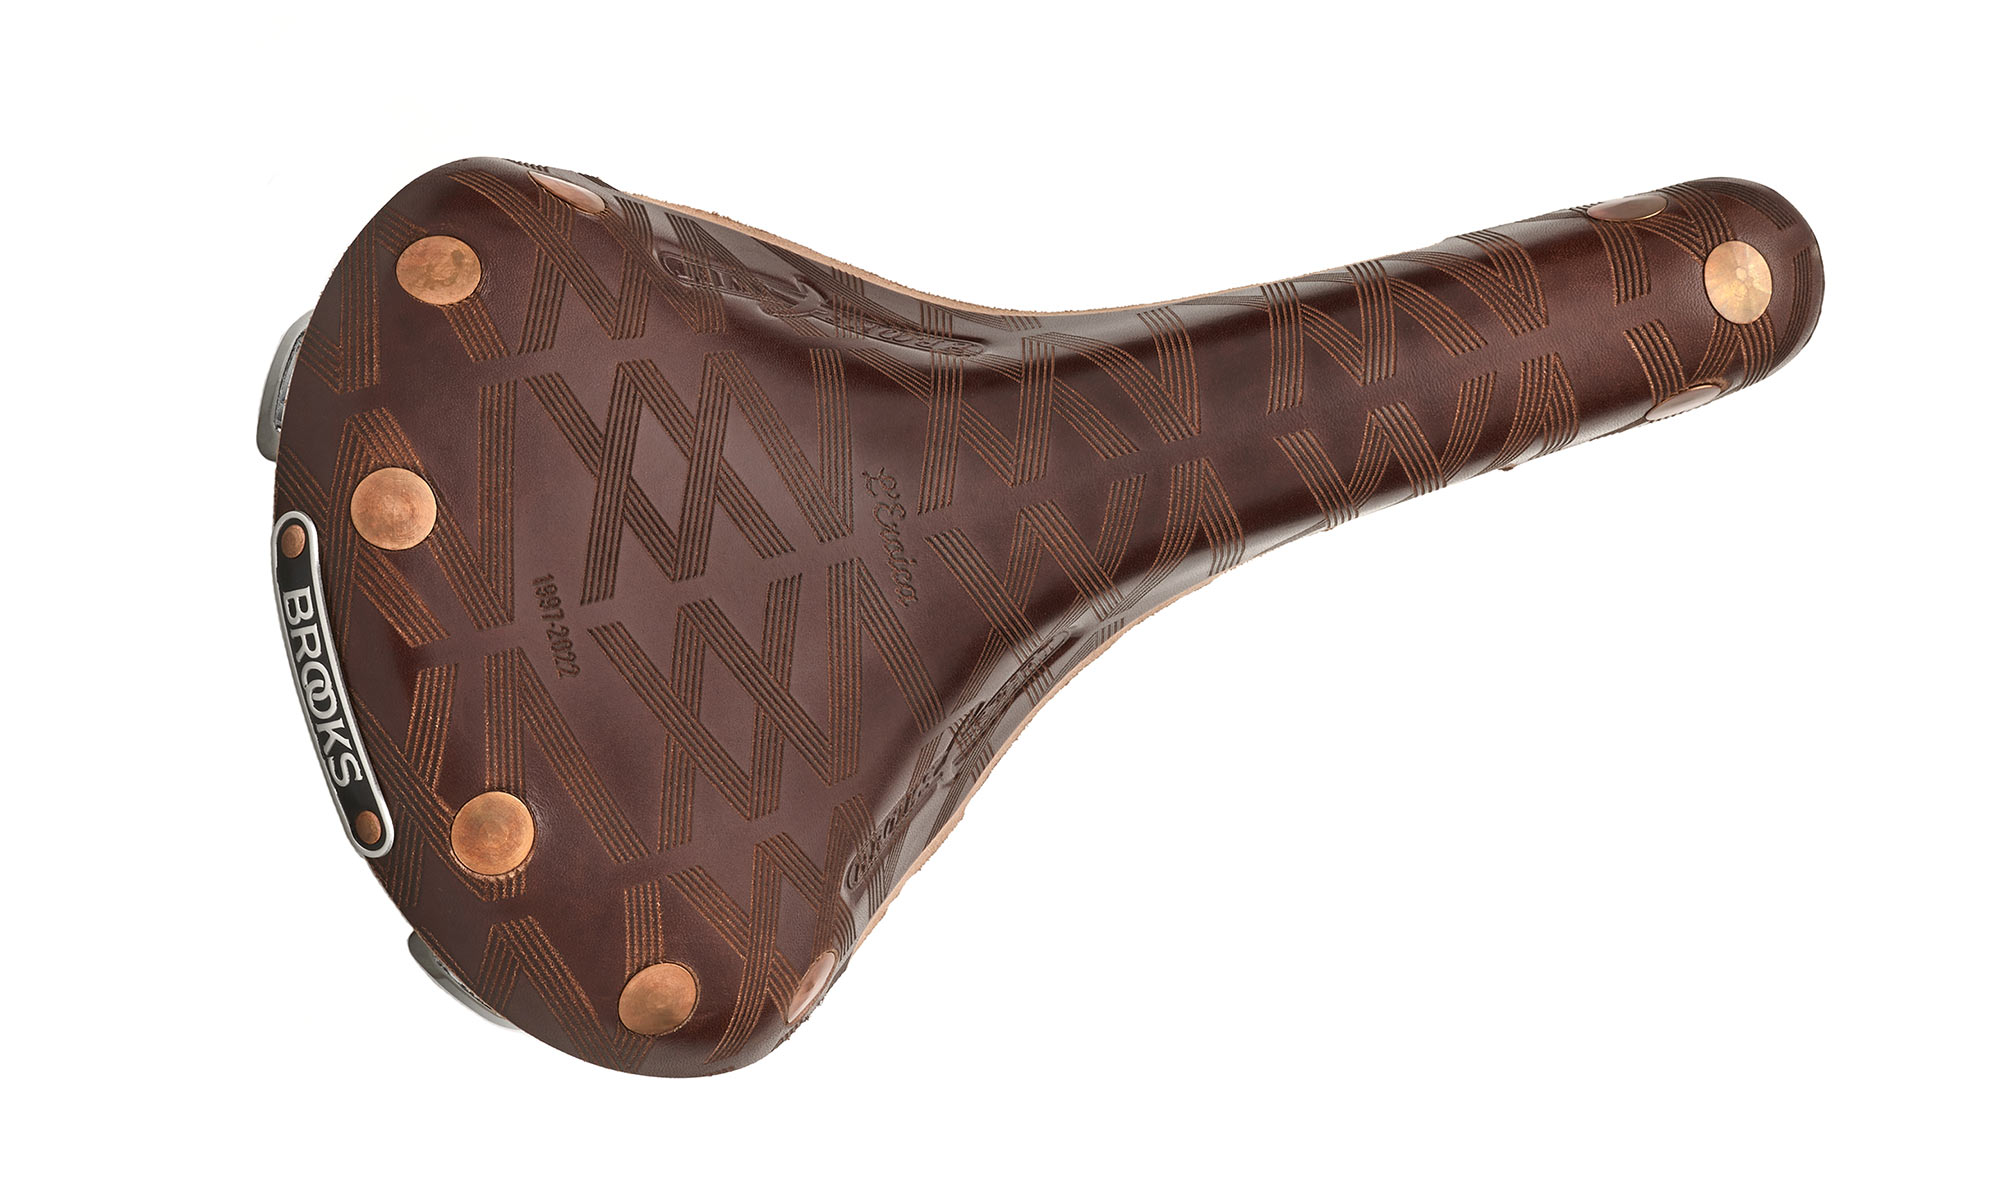 Brooks Swift Eroica XXV limited edition leather saddle, top